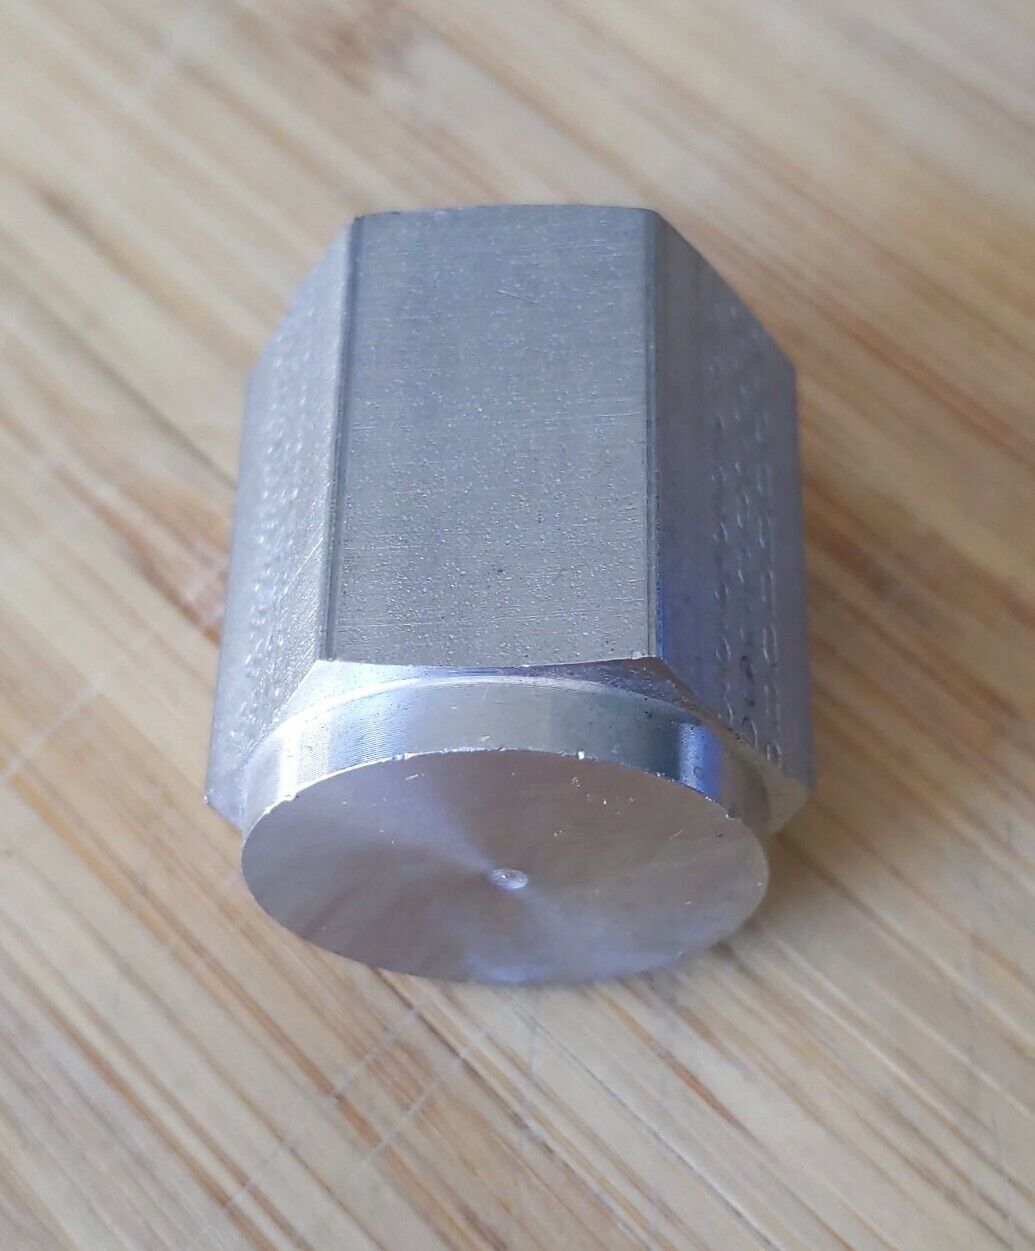 Parker SS-6-CP New Stainless Pipe Cap Fitting 3/8" Female NPT 5300 PSI (BL108)